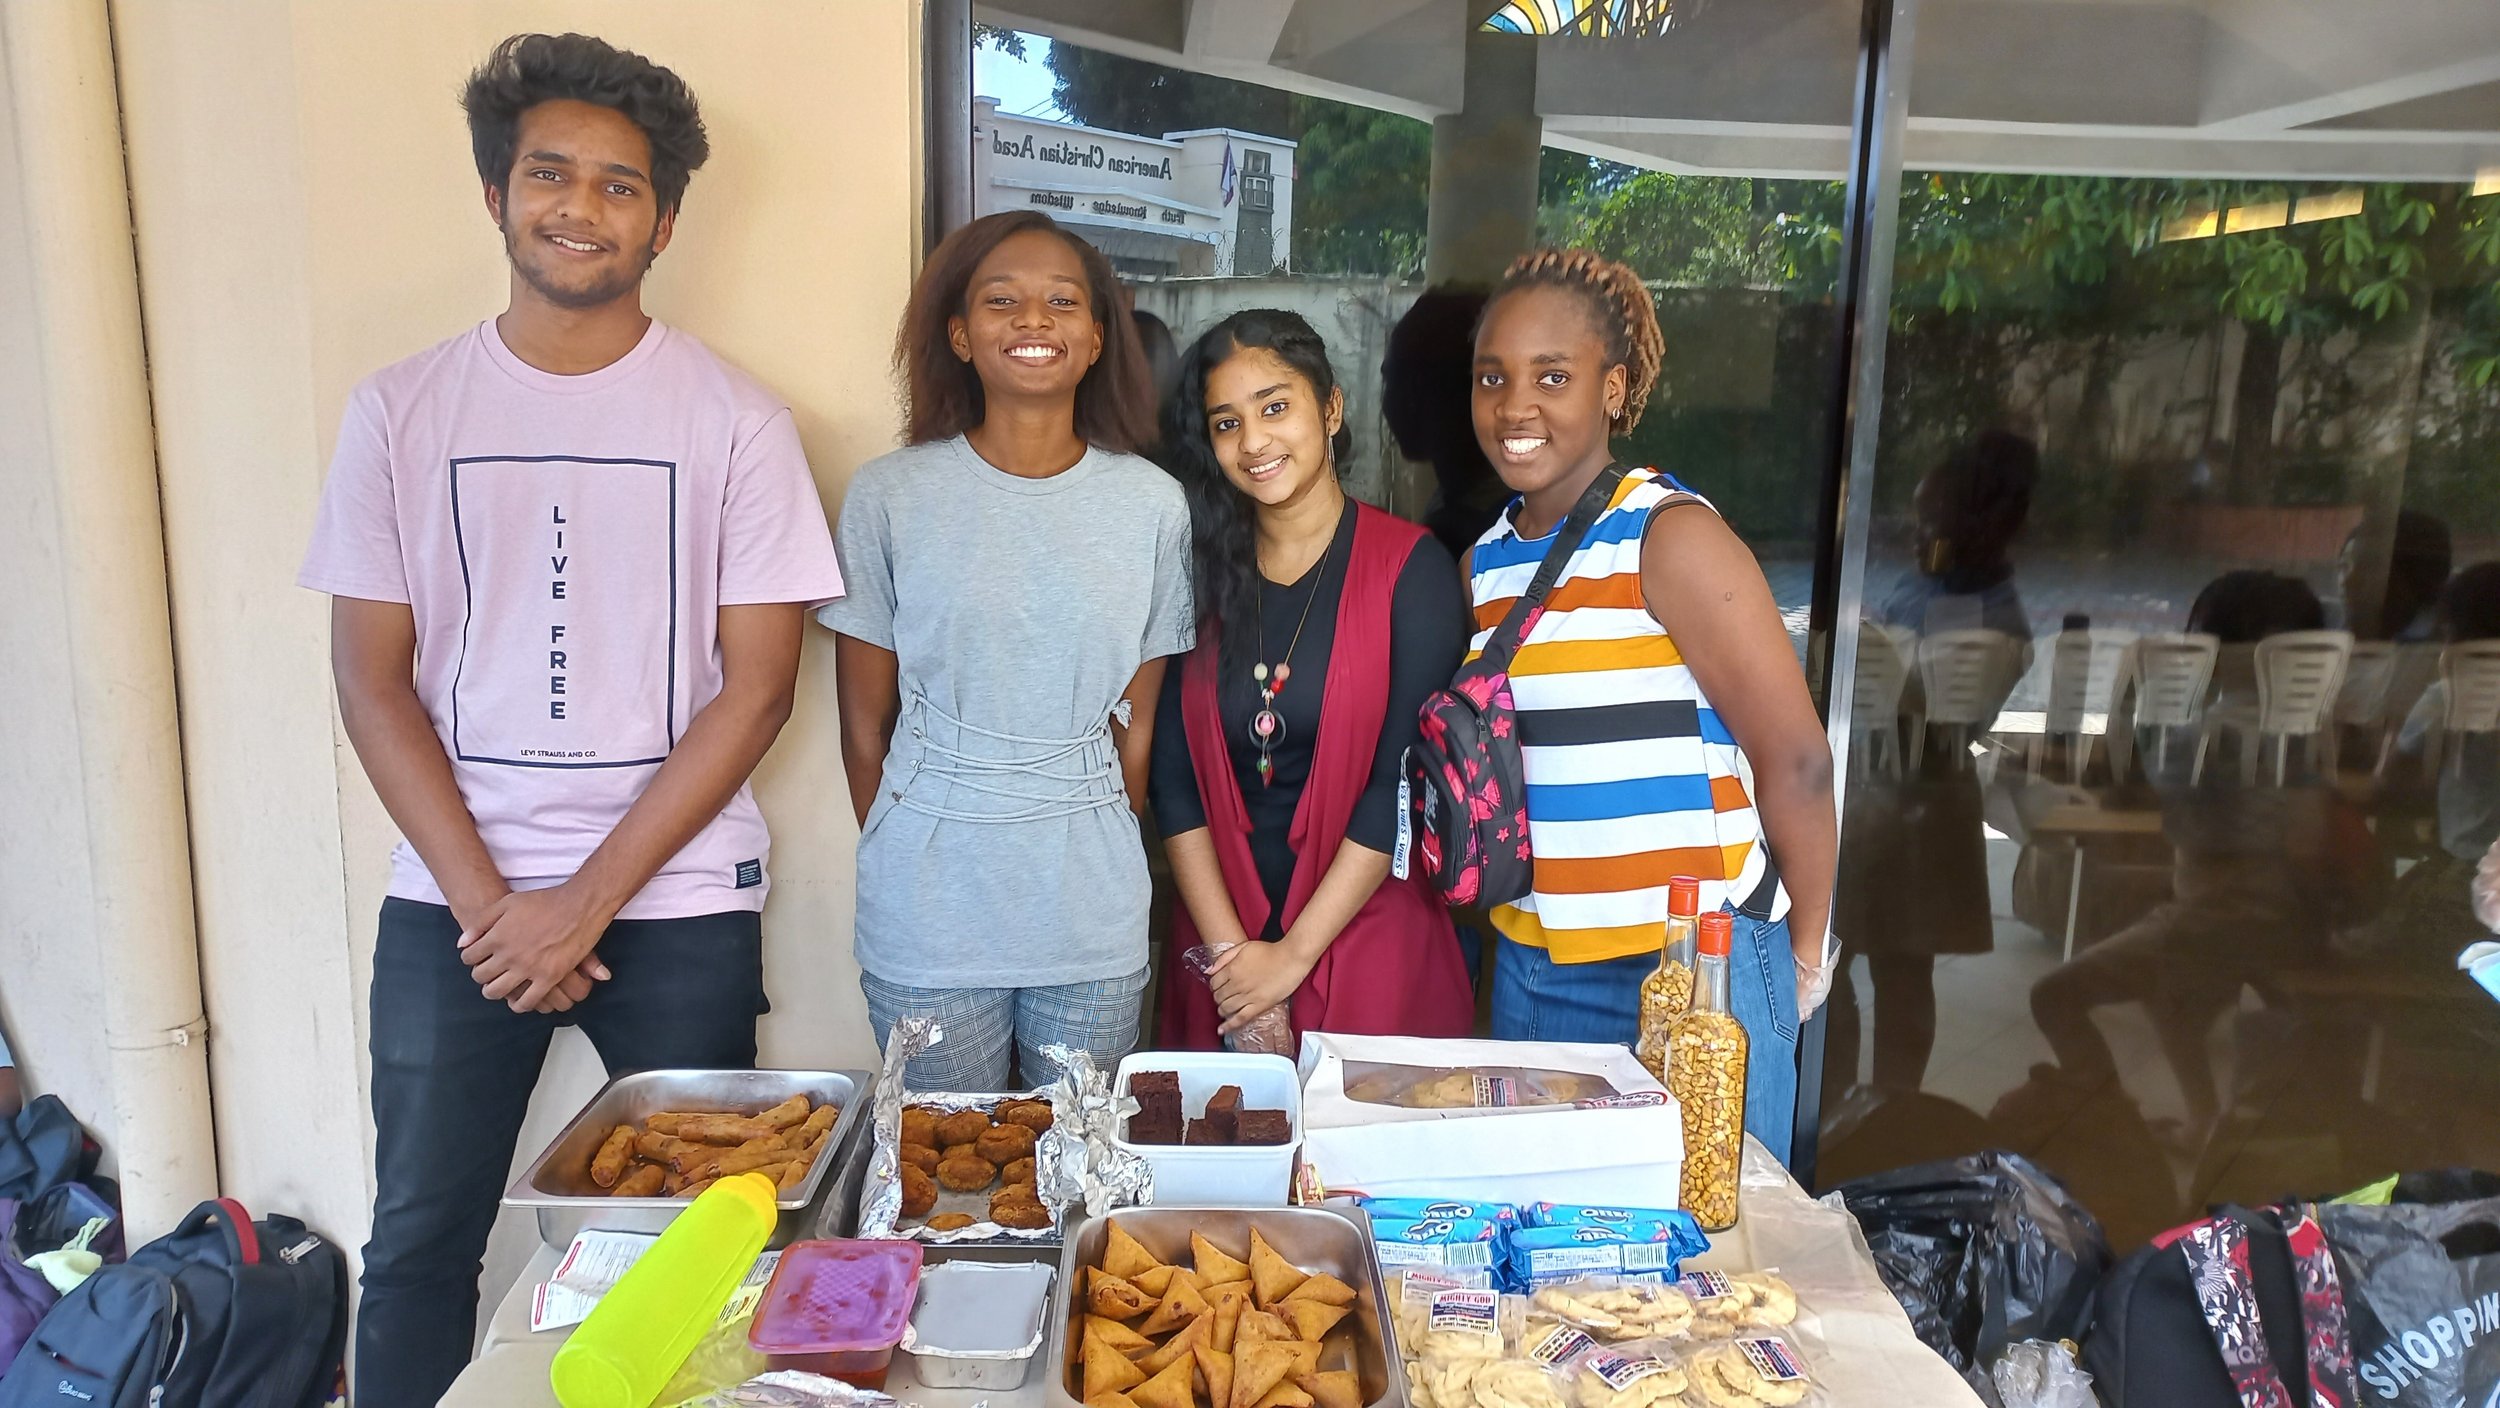  Thanks to everyone who came out to support our 12th grade student Bake Sale! 